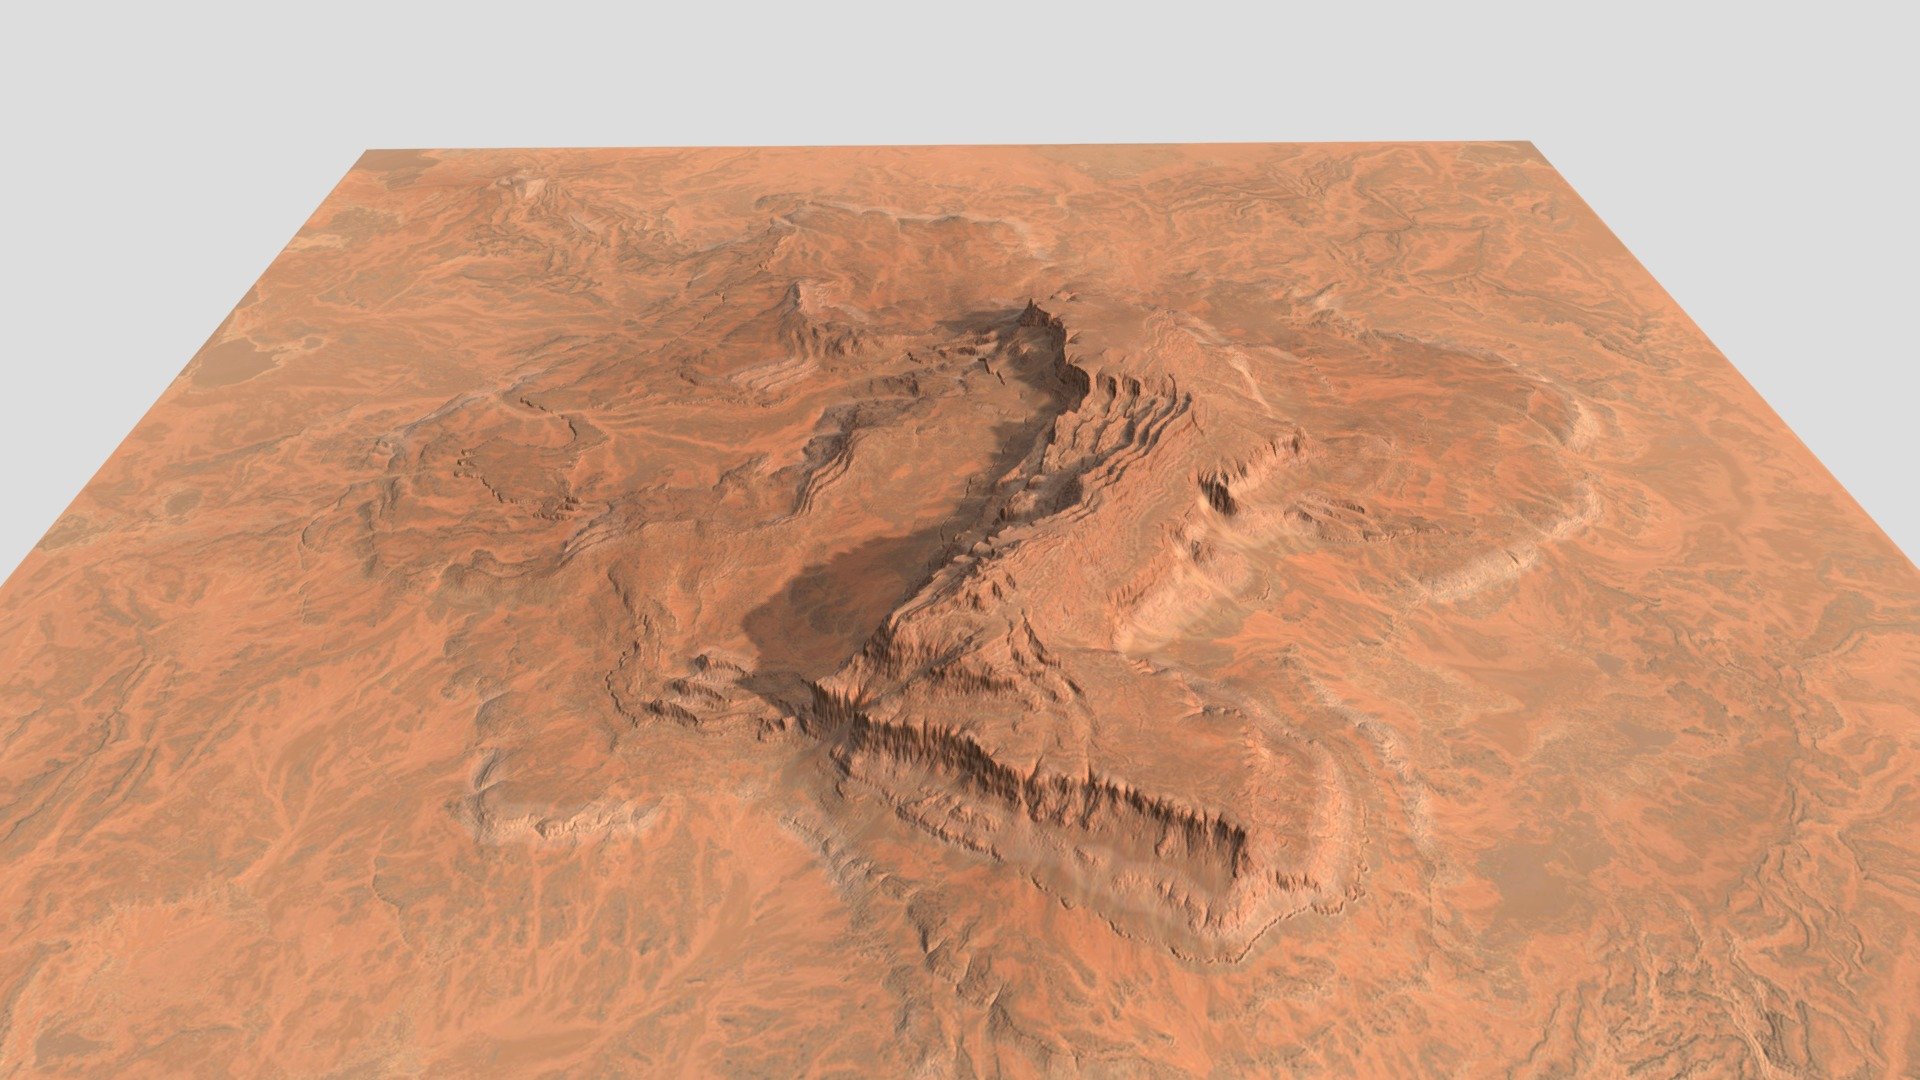 Large Desert Plateau V.7

Optimized 3D Model of Large Desert Plateau ready for Cinematics, Animations, and Games. This asset is native to Blender and Unreal Engine 5. This asset is based on a 5000x5000 km area but can be scaled to fit your needs and is meant for medium to far shots.

This mesh is Optimized to only have more triangles where needed, while flatter areas contain less triangles.

This Asset Includes:

8, 4K Textures (Color, Normal, Displacement, Texture, Flow, Occlusion, Slope Mask, Vegetation Mask) 2, 4K CC0 Tileable texture sets for additional Detail (Rock and Sand) (Color, Normal, Displacement, Roughness)

3 LODs (LOD0.fbx, LOD1.fbx, LOD2.fbx) .Blend and .Uasset use LOD2, but can easily be replaced for higher LOD for more detail

.Blend and .Uasset with custom materials that have a masked slope with a triplanar rock texture to remove any UV Stretching.

.PDF FILE FAQ and Guide with more information and detail on the asset and how to use the accompanying textures and Materials 3d model